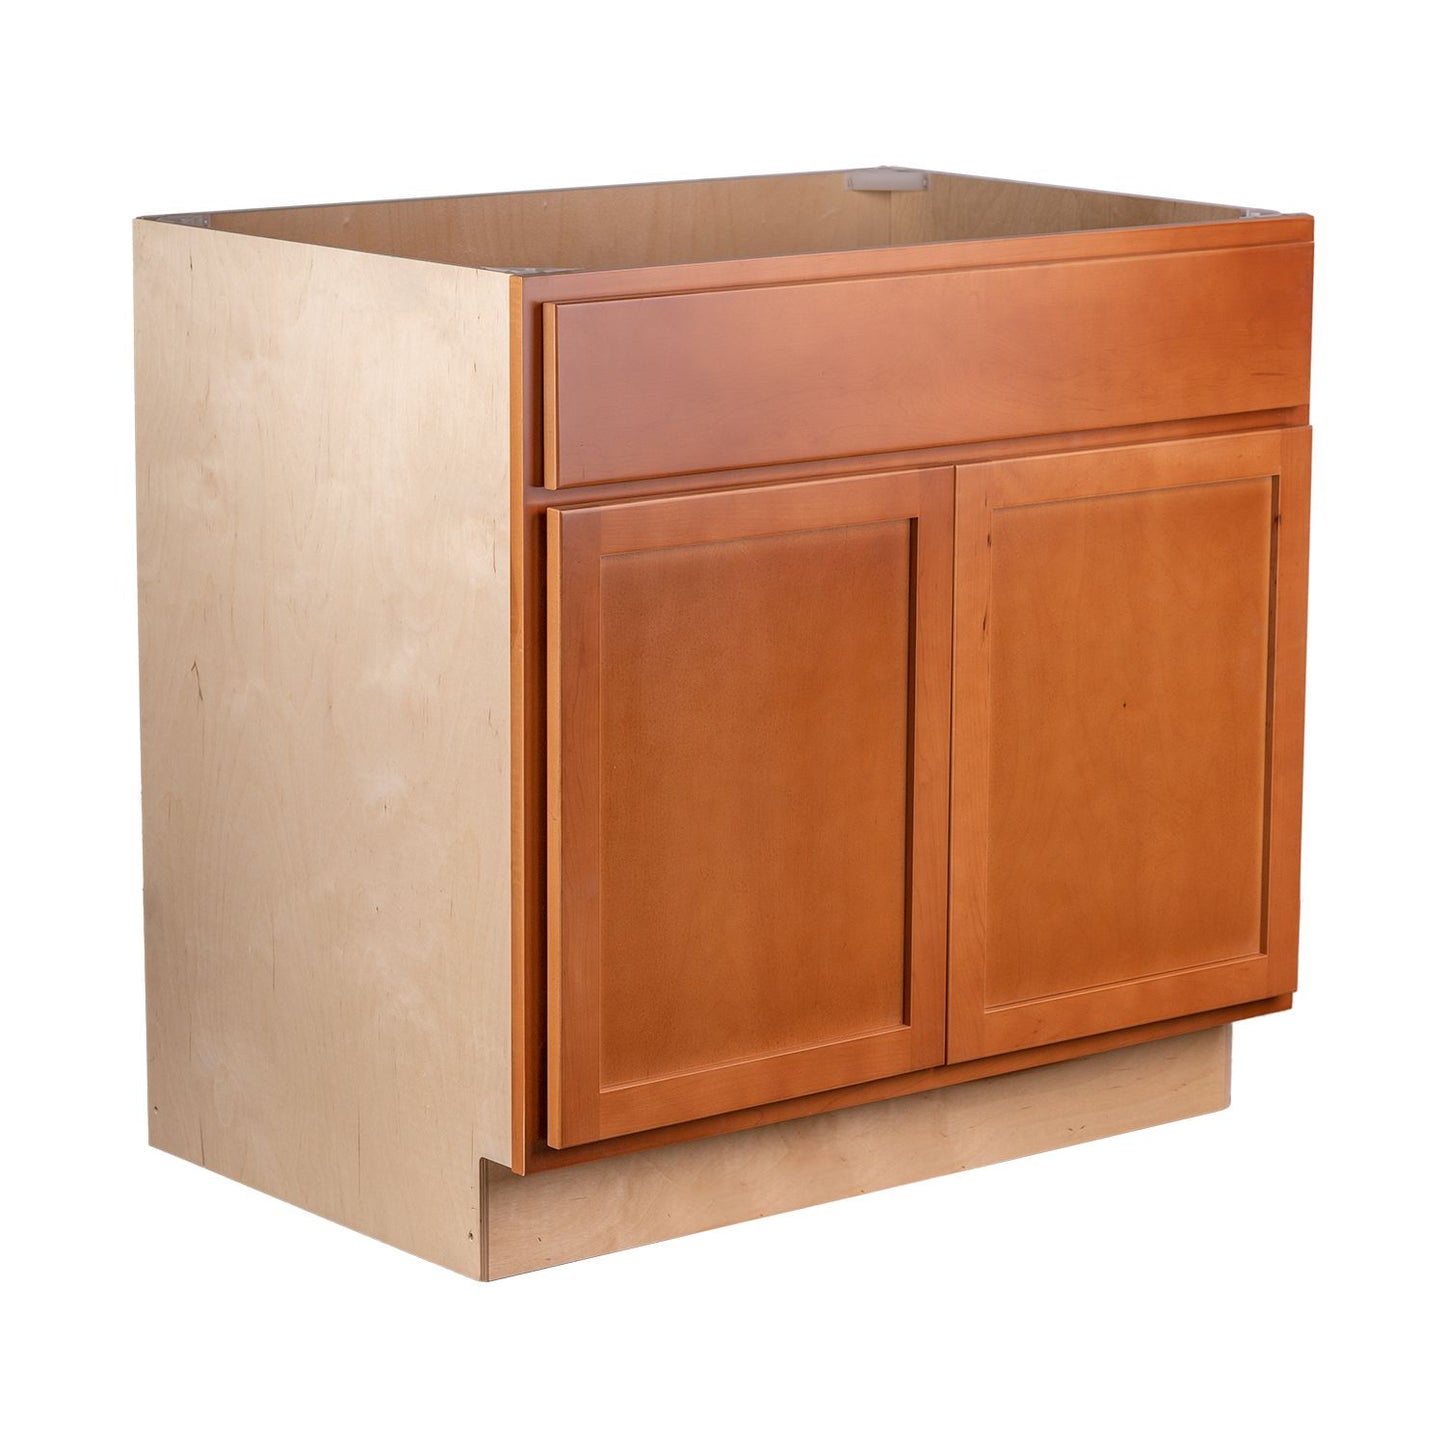 Quicklock RTA (Ready-to-Assemble) Provincial Stain Base Cabinet- Large (30", 36"W)